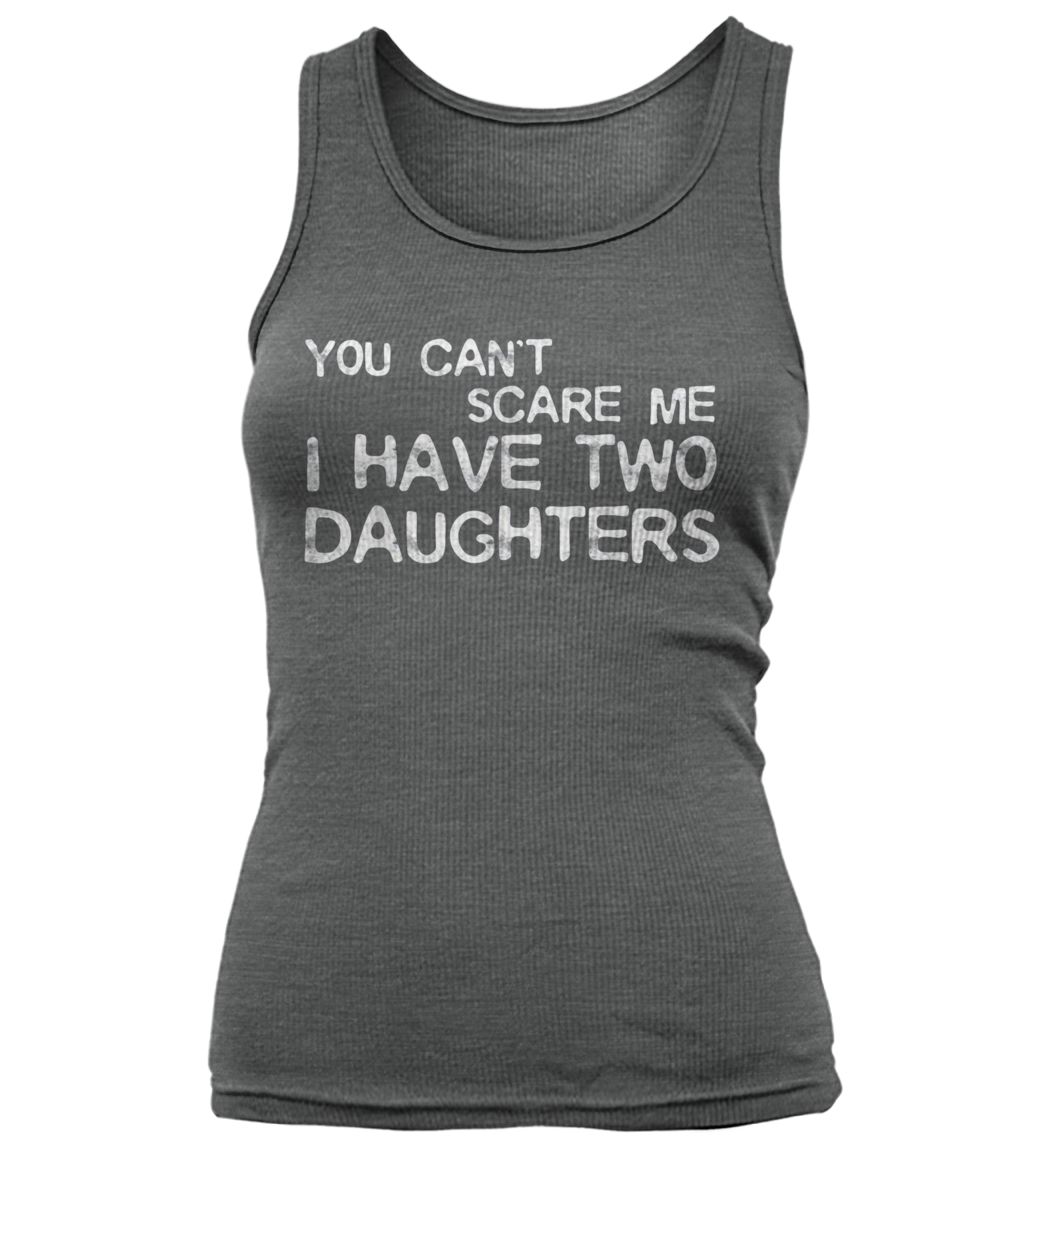 You can't scare me I have two daughters women's tank top